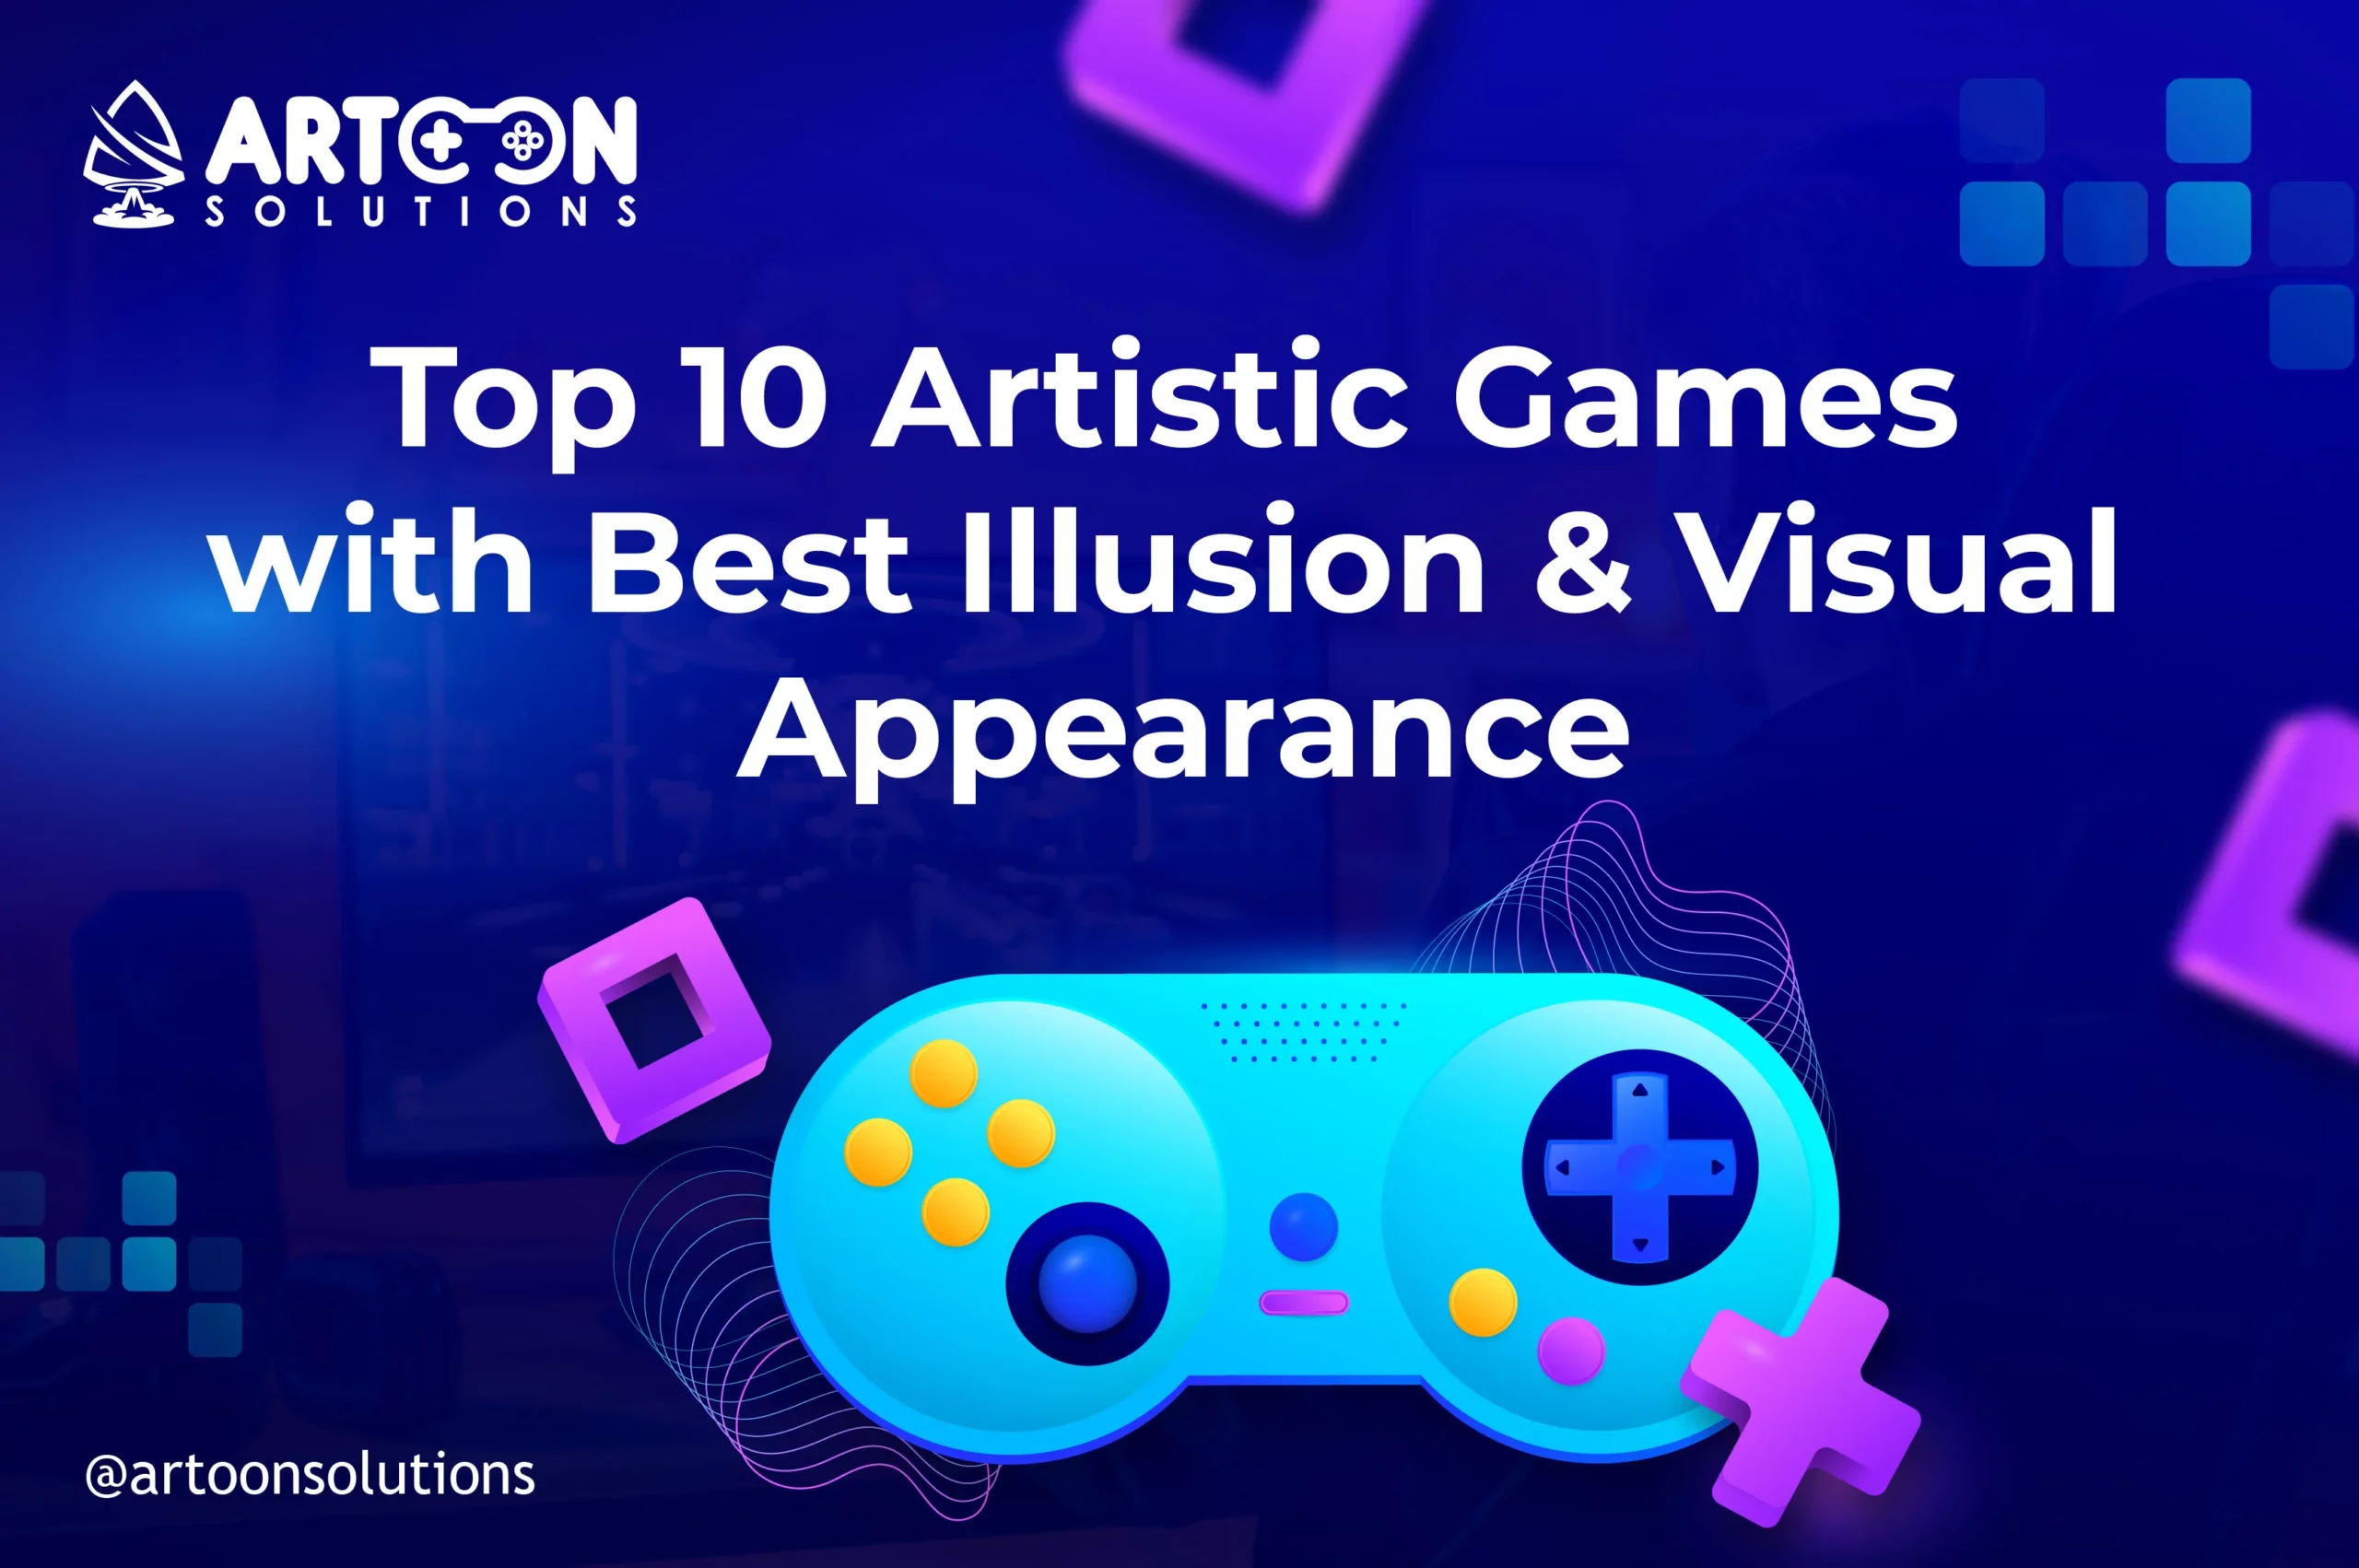 Top 10 Artistic Games with Best Illusion & Visual Appearance